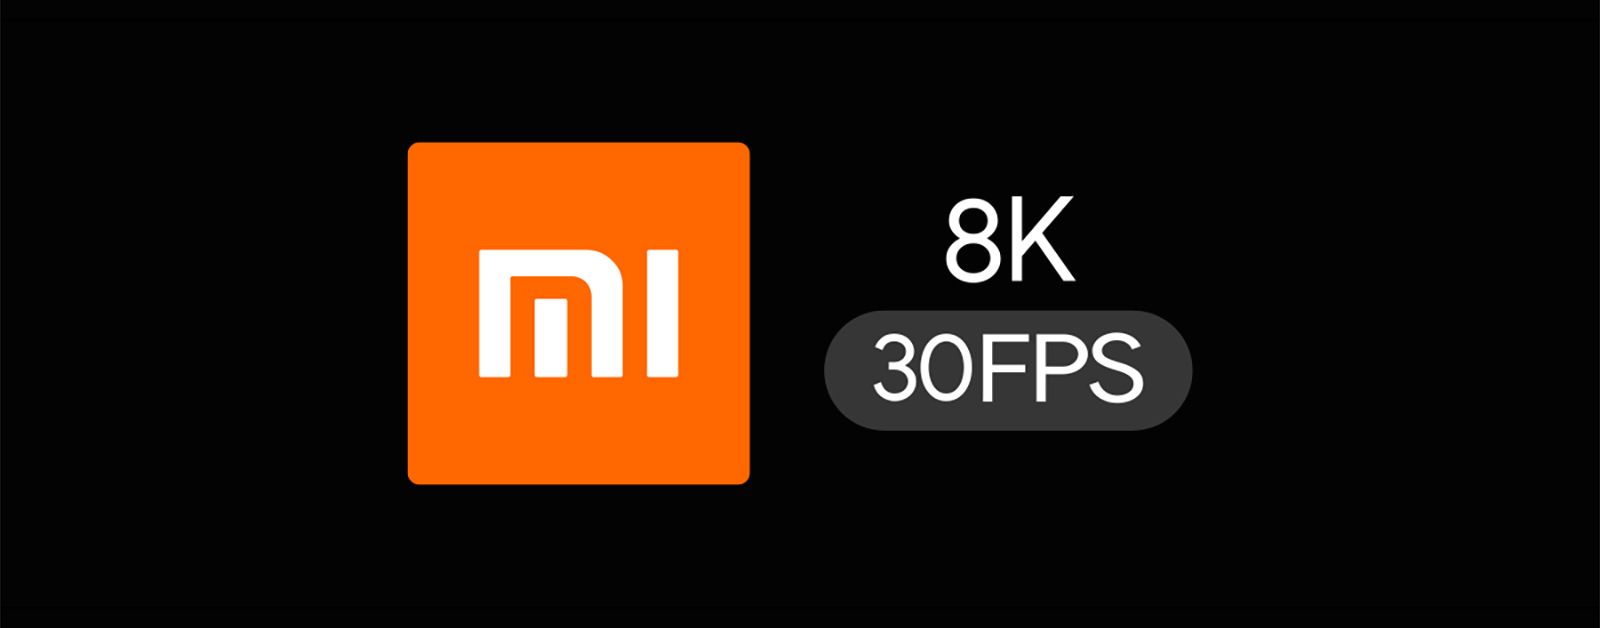 Future Xiaomi Phone Will Support 8k Video image 3